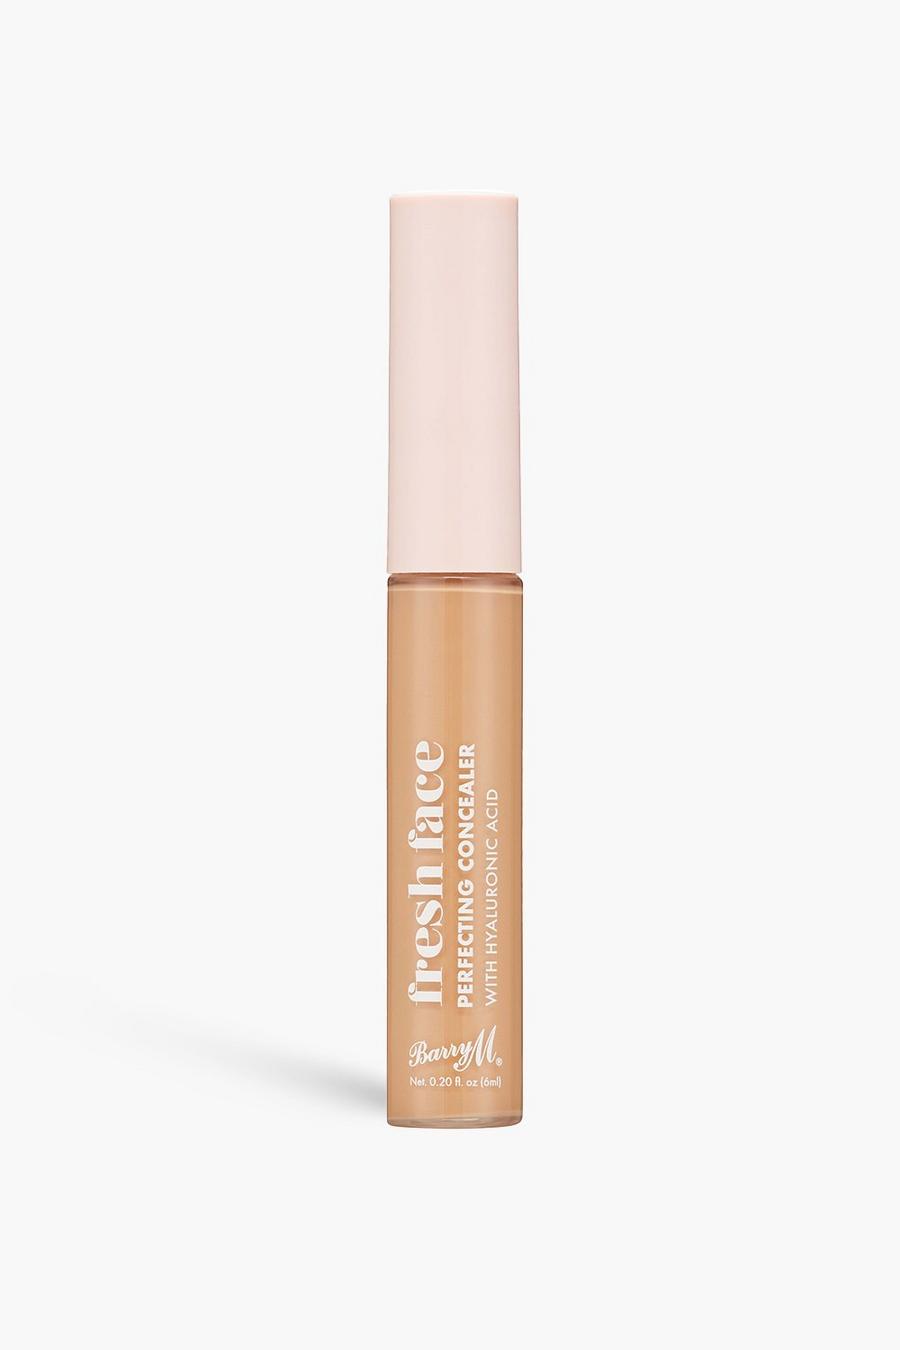 Barry M Fresh Face Perfecting Concealer 6, Tan brown